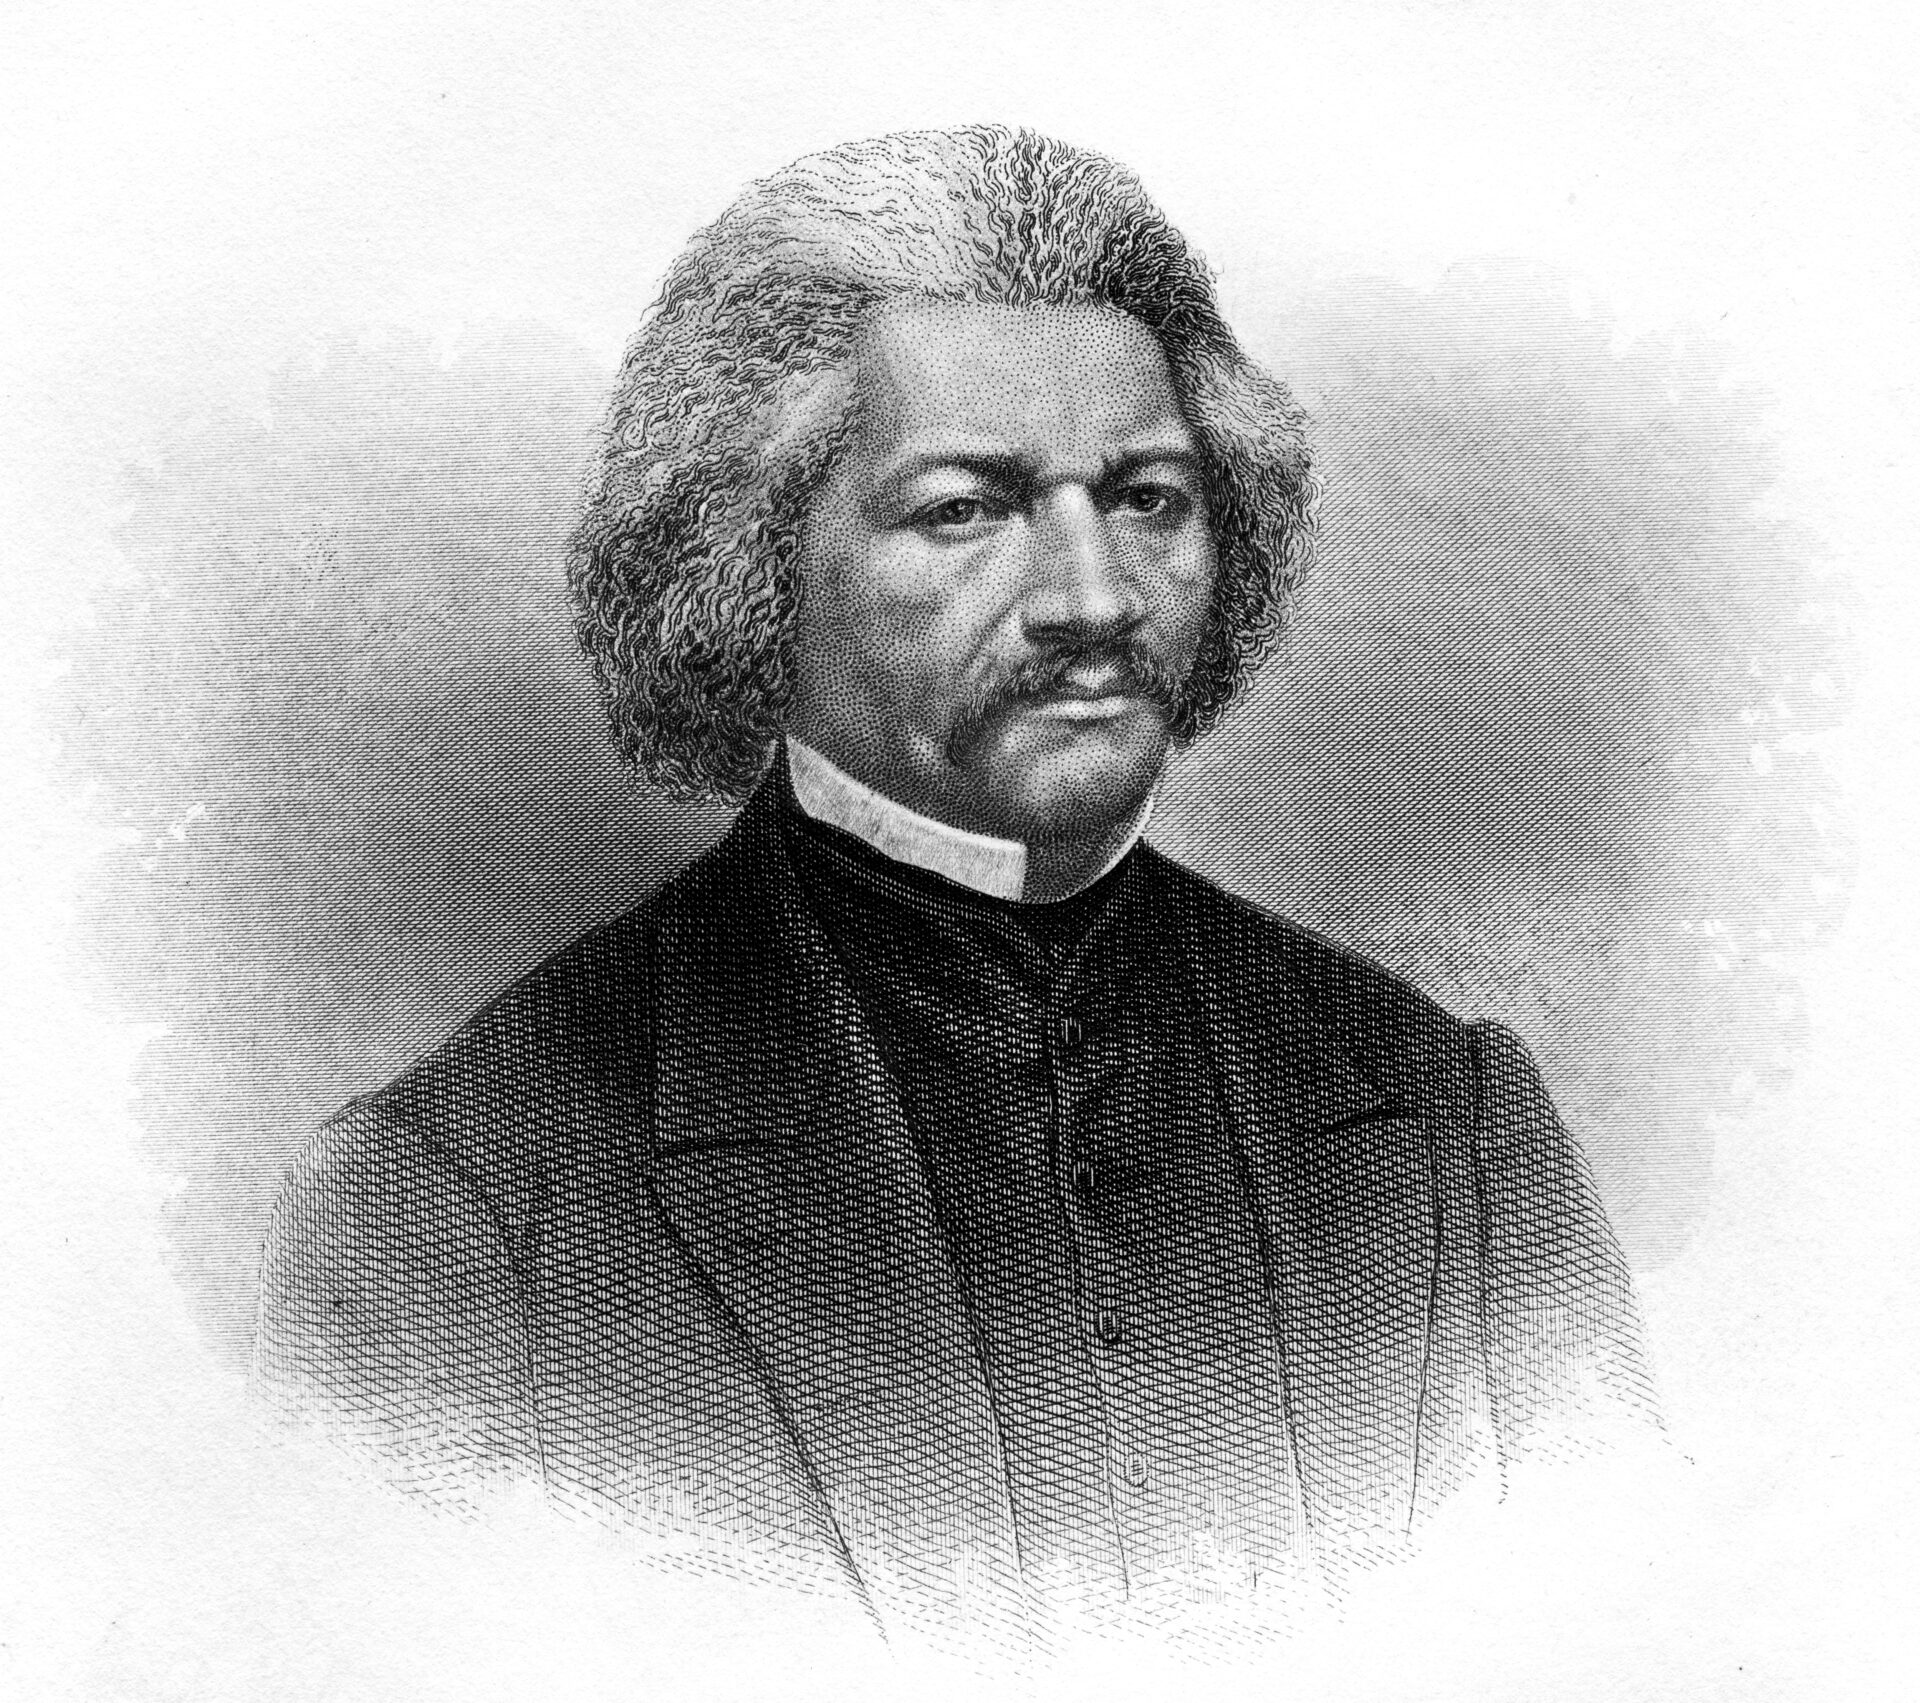 What Can We Learn from Frederick Douglass?